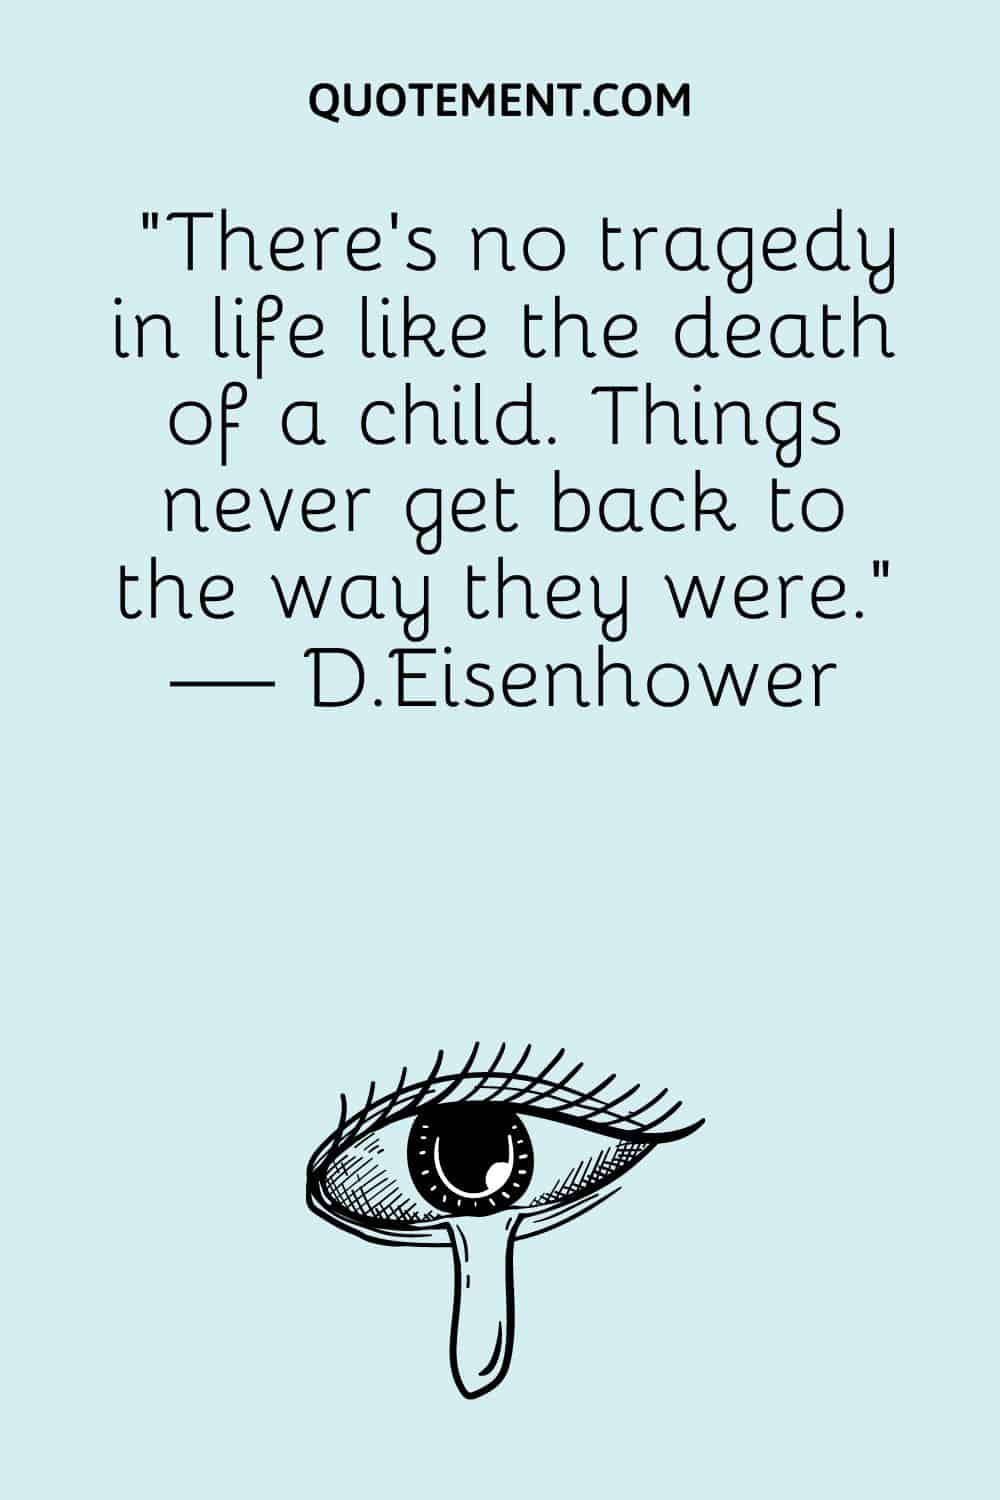 “There’s no tragedy in life like the death of a child. Things never get back to the way they were.” — D.Eisenhower